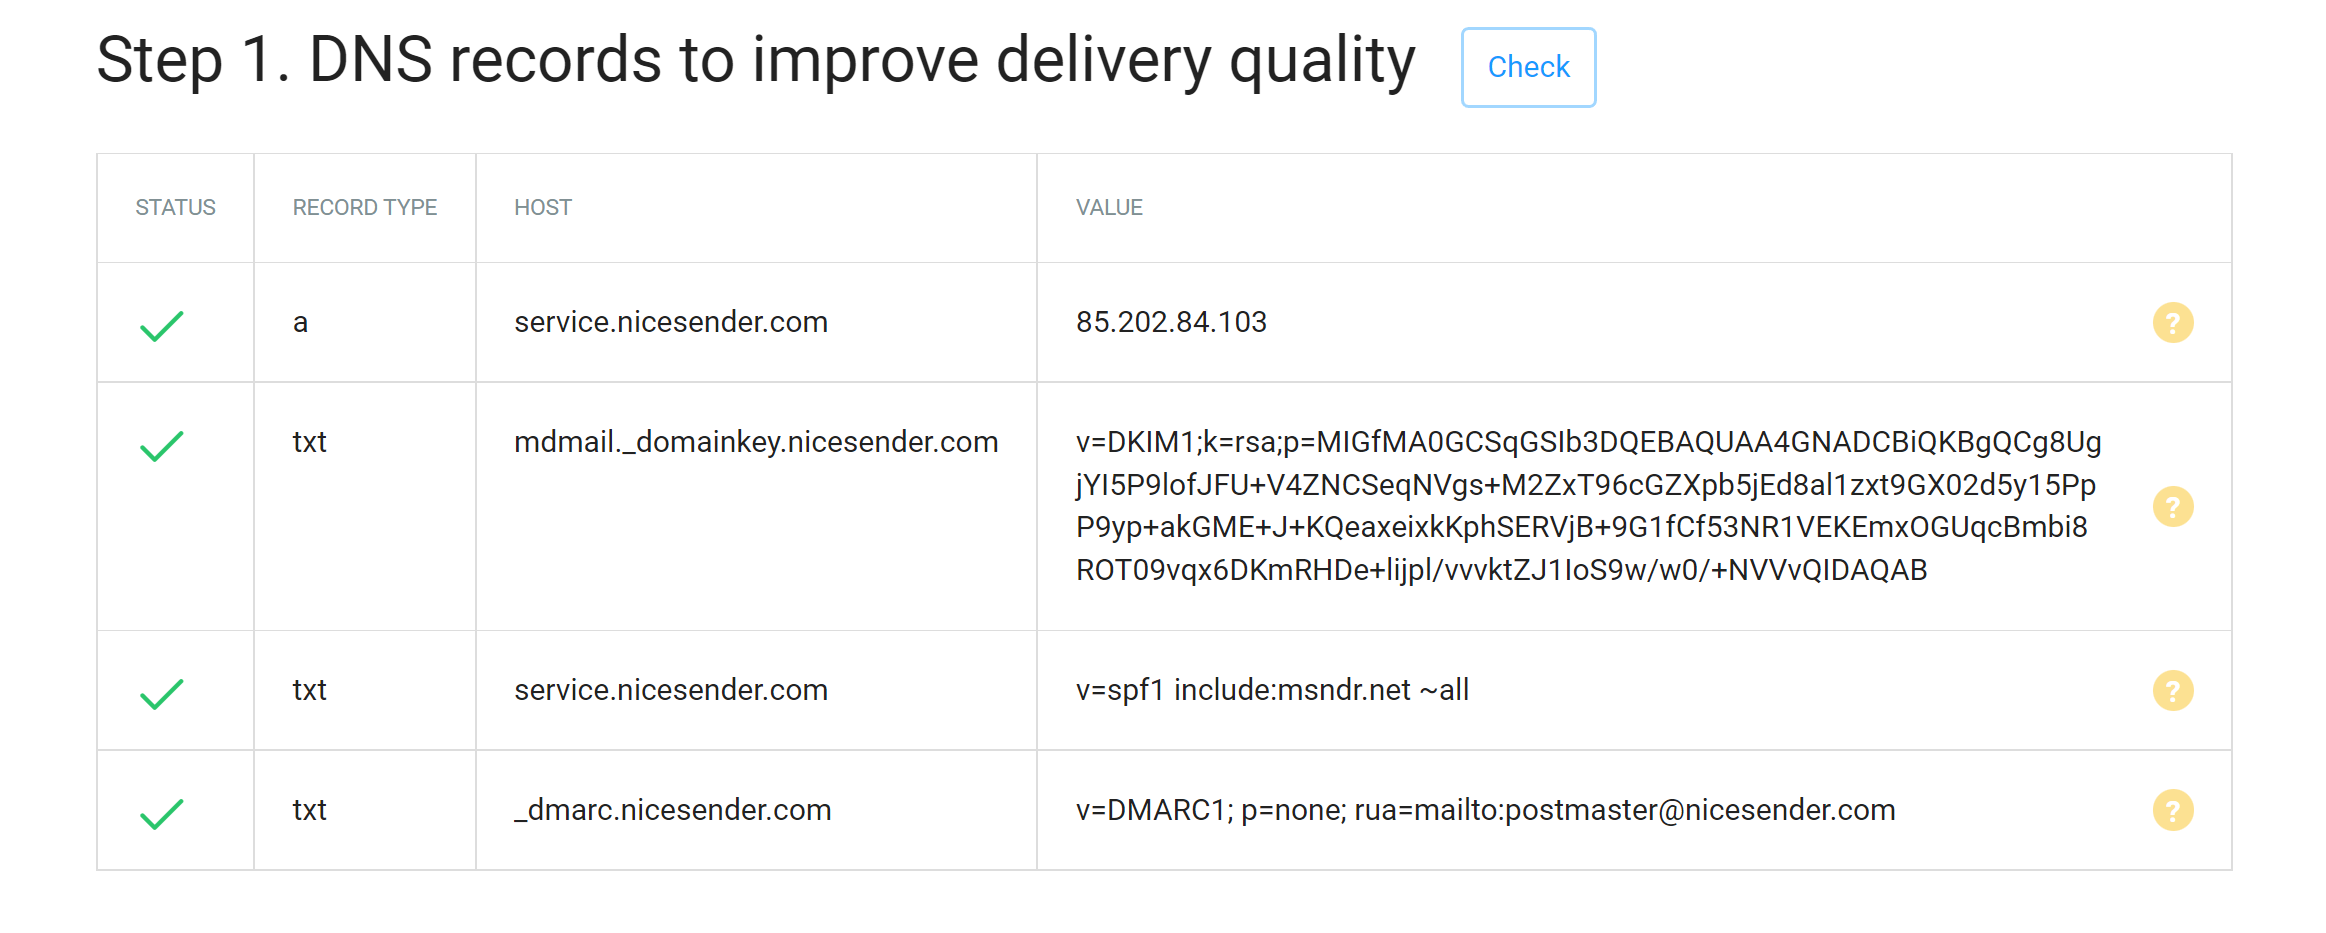 DNS records improve quality of a mailing delivery